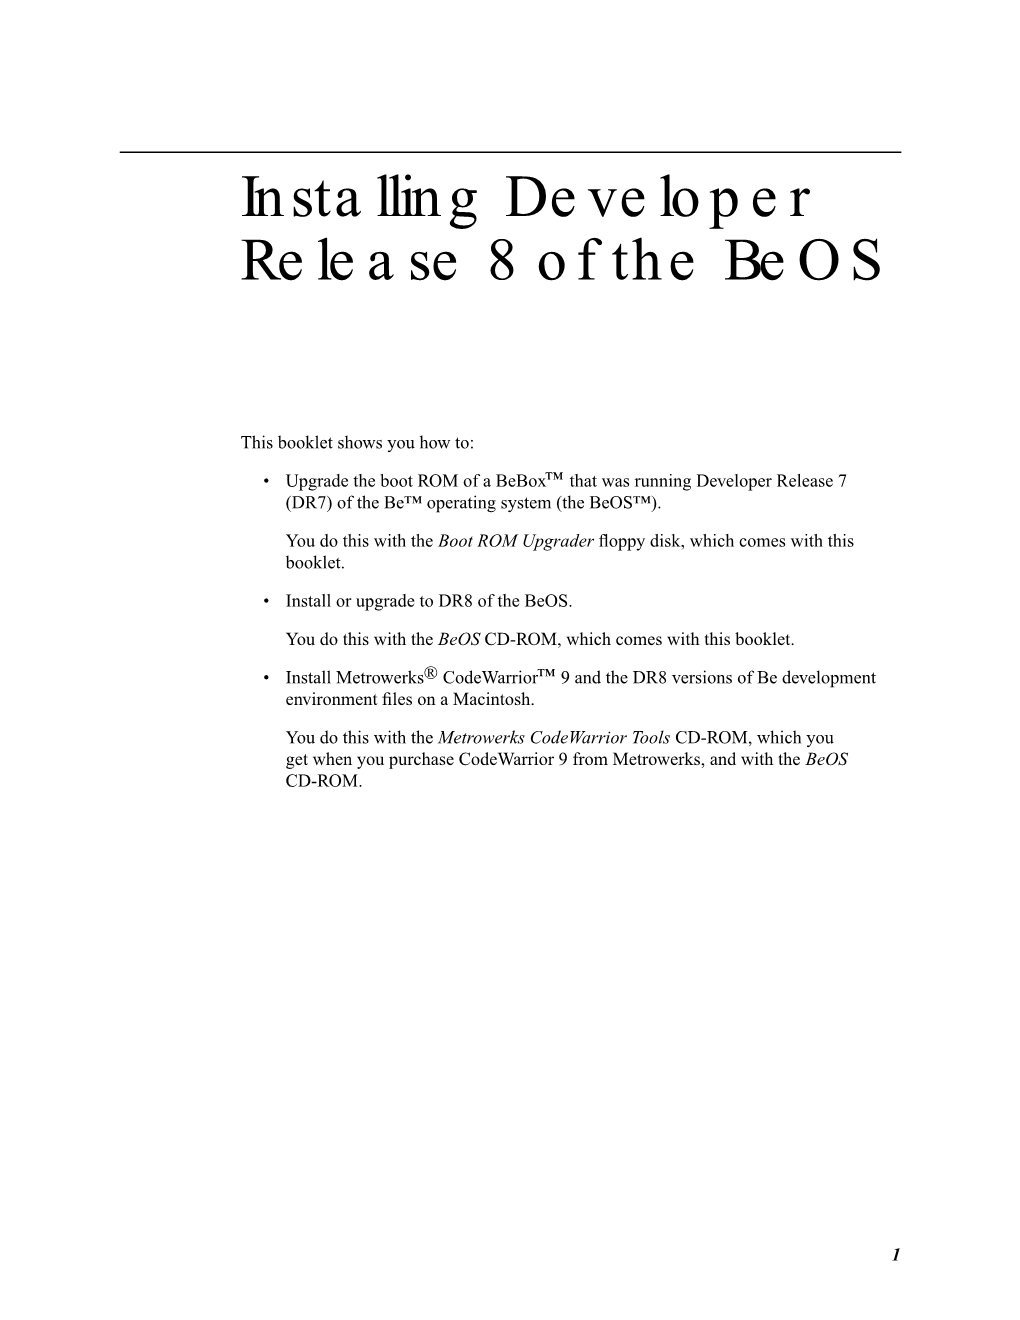 Installing Developer Release 8 of the Beos